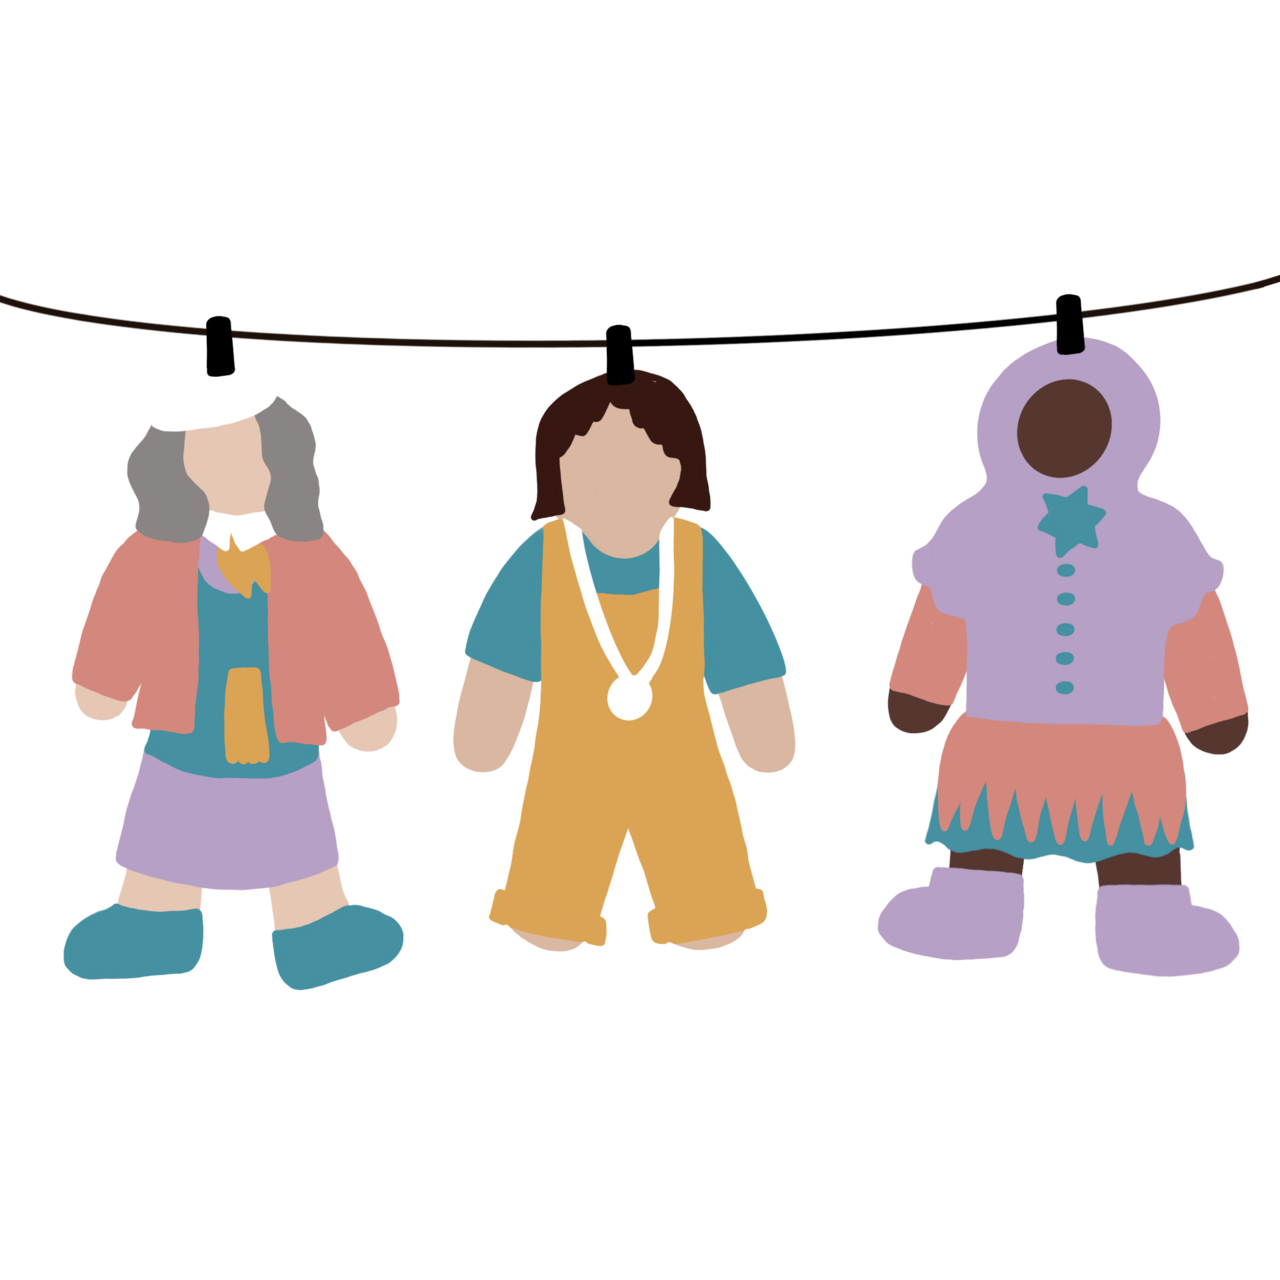 An illustration of some of the 'proud people' figures I make with young people